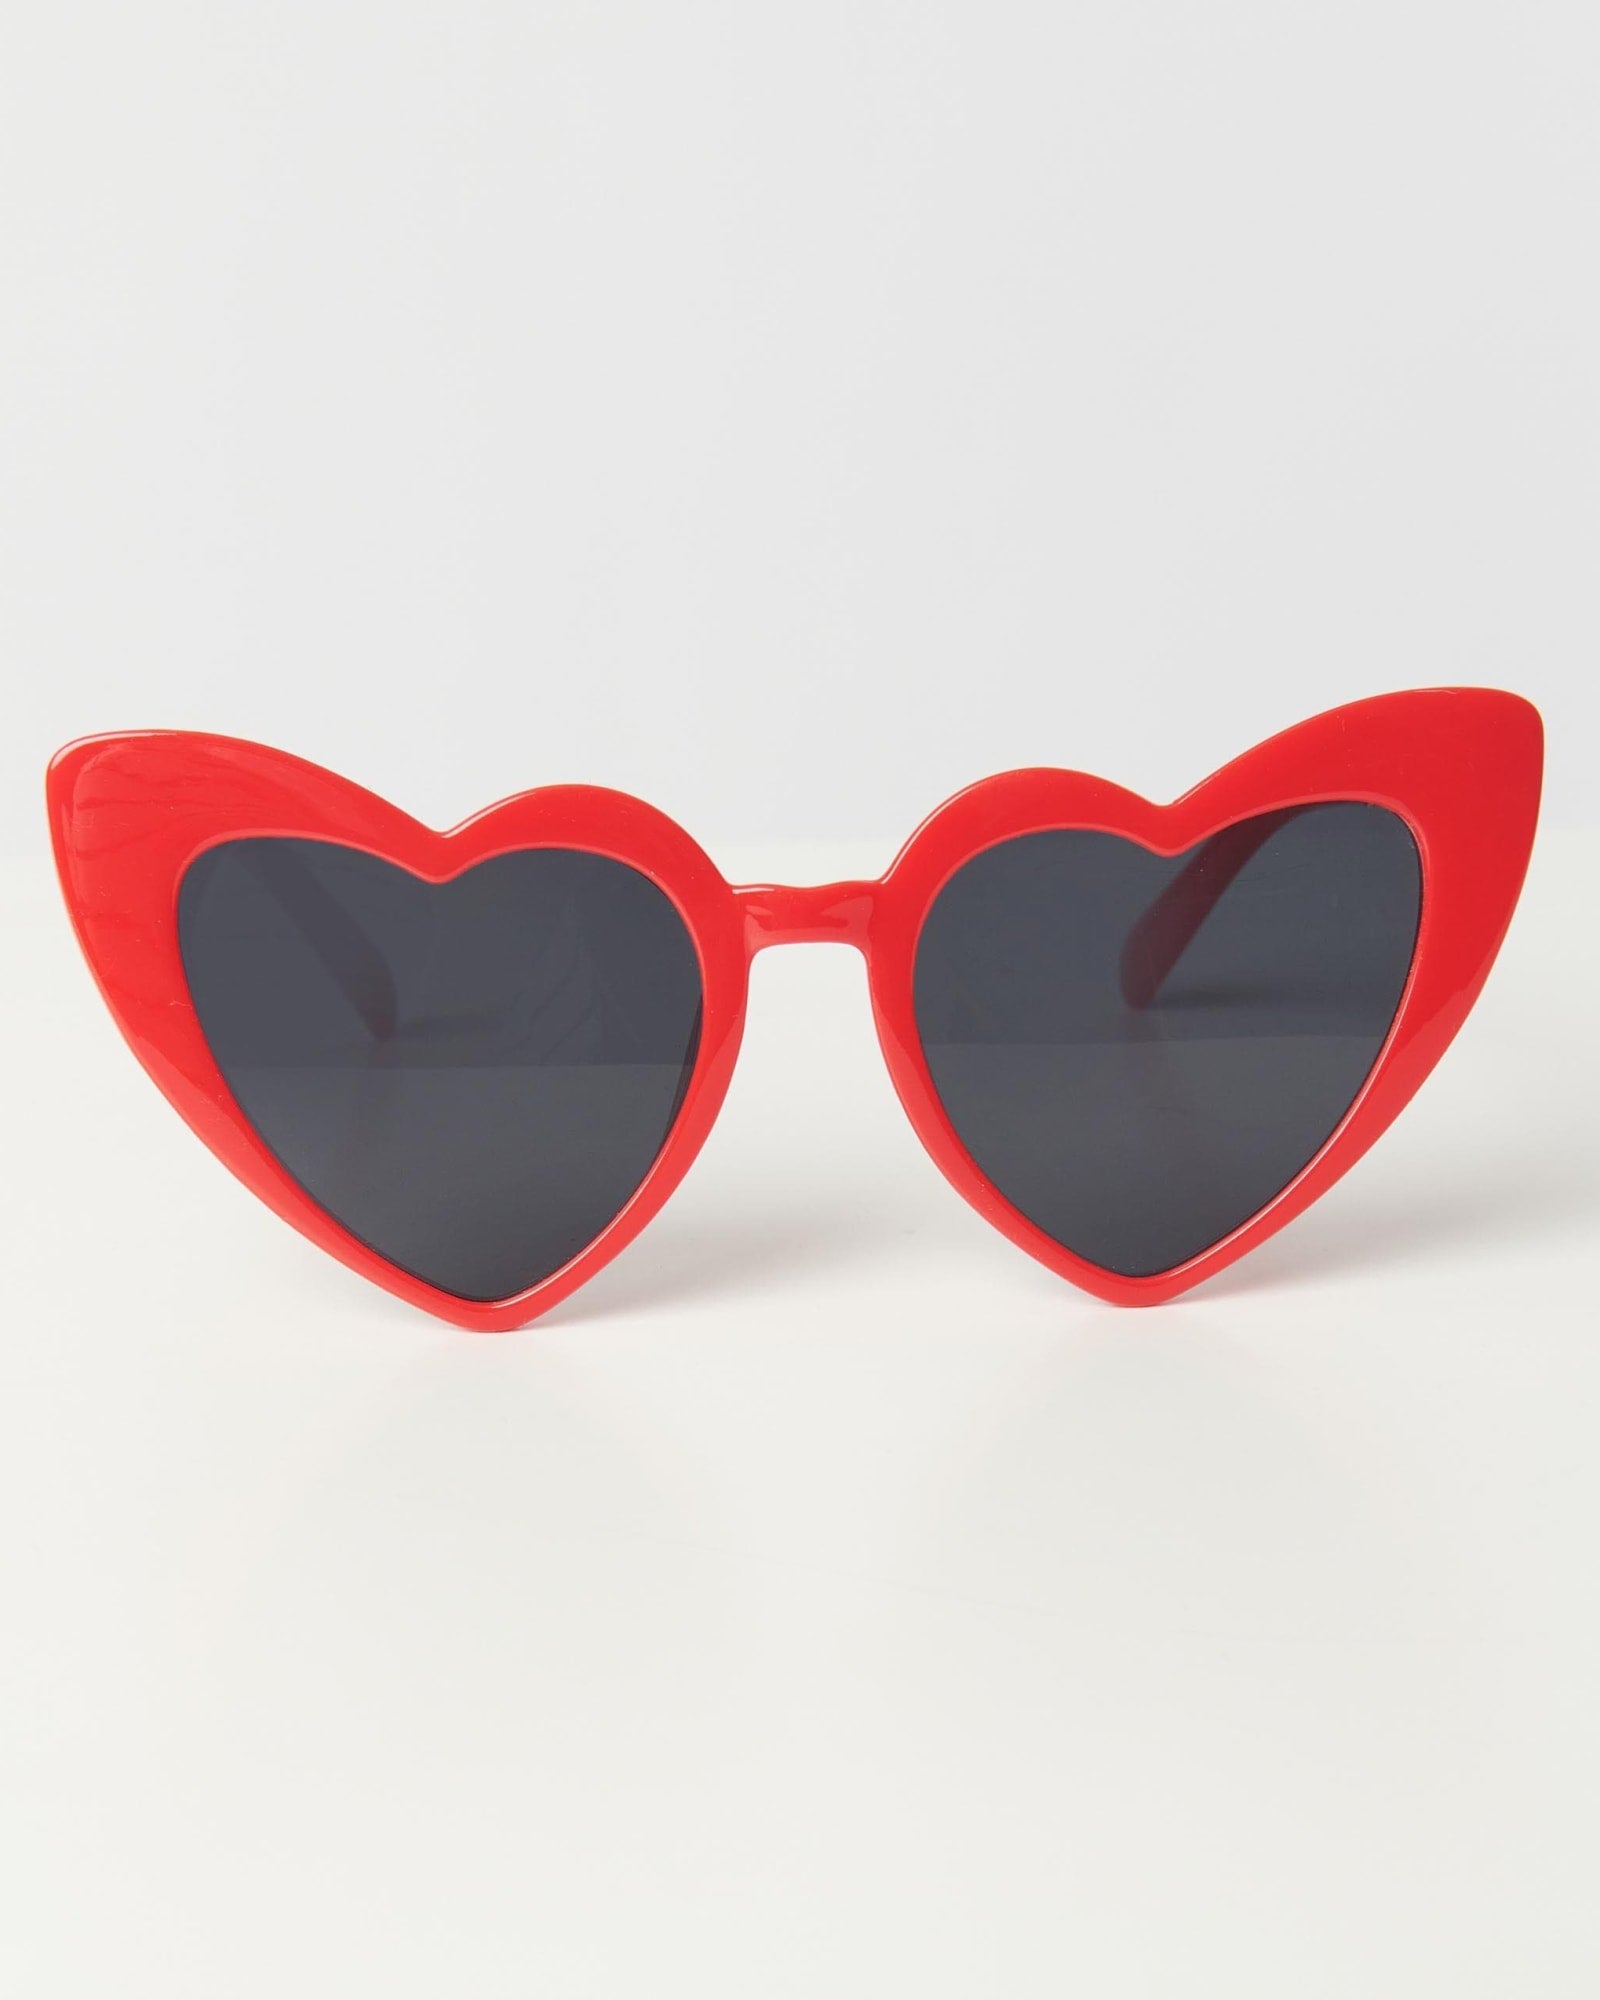 Unique Vintage Red Heart Sunglasses | Red